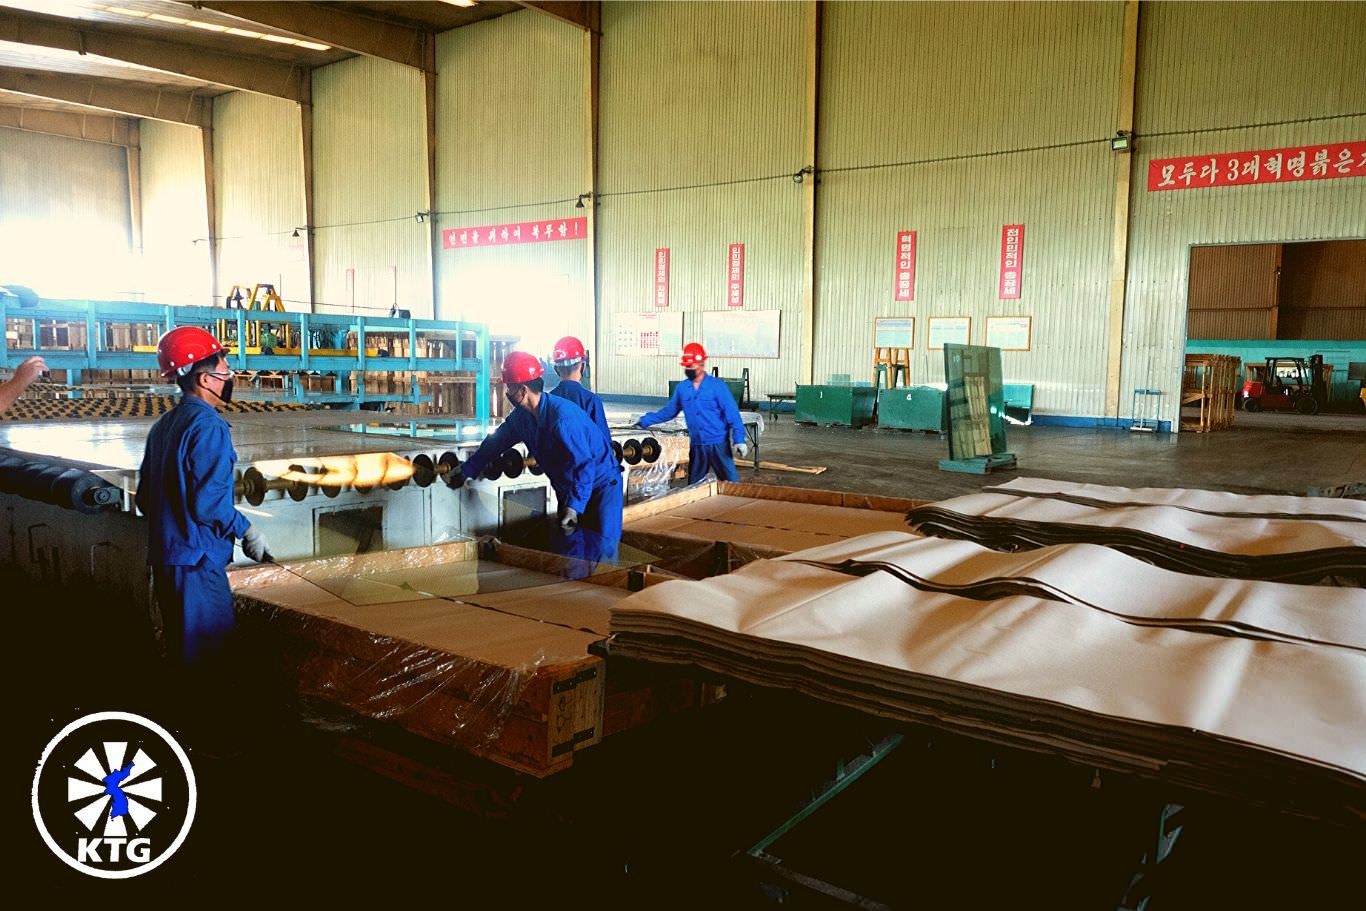 Taen Glass Factory near Nampo city in North Korea. Discover the DPRK with KTG